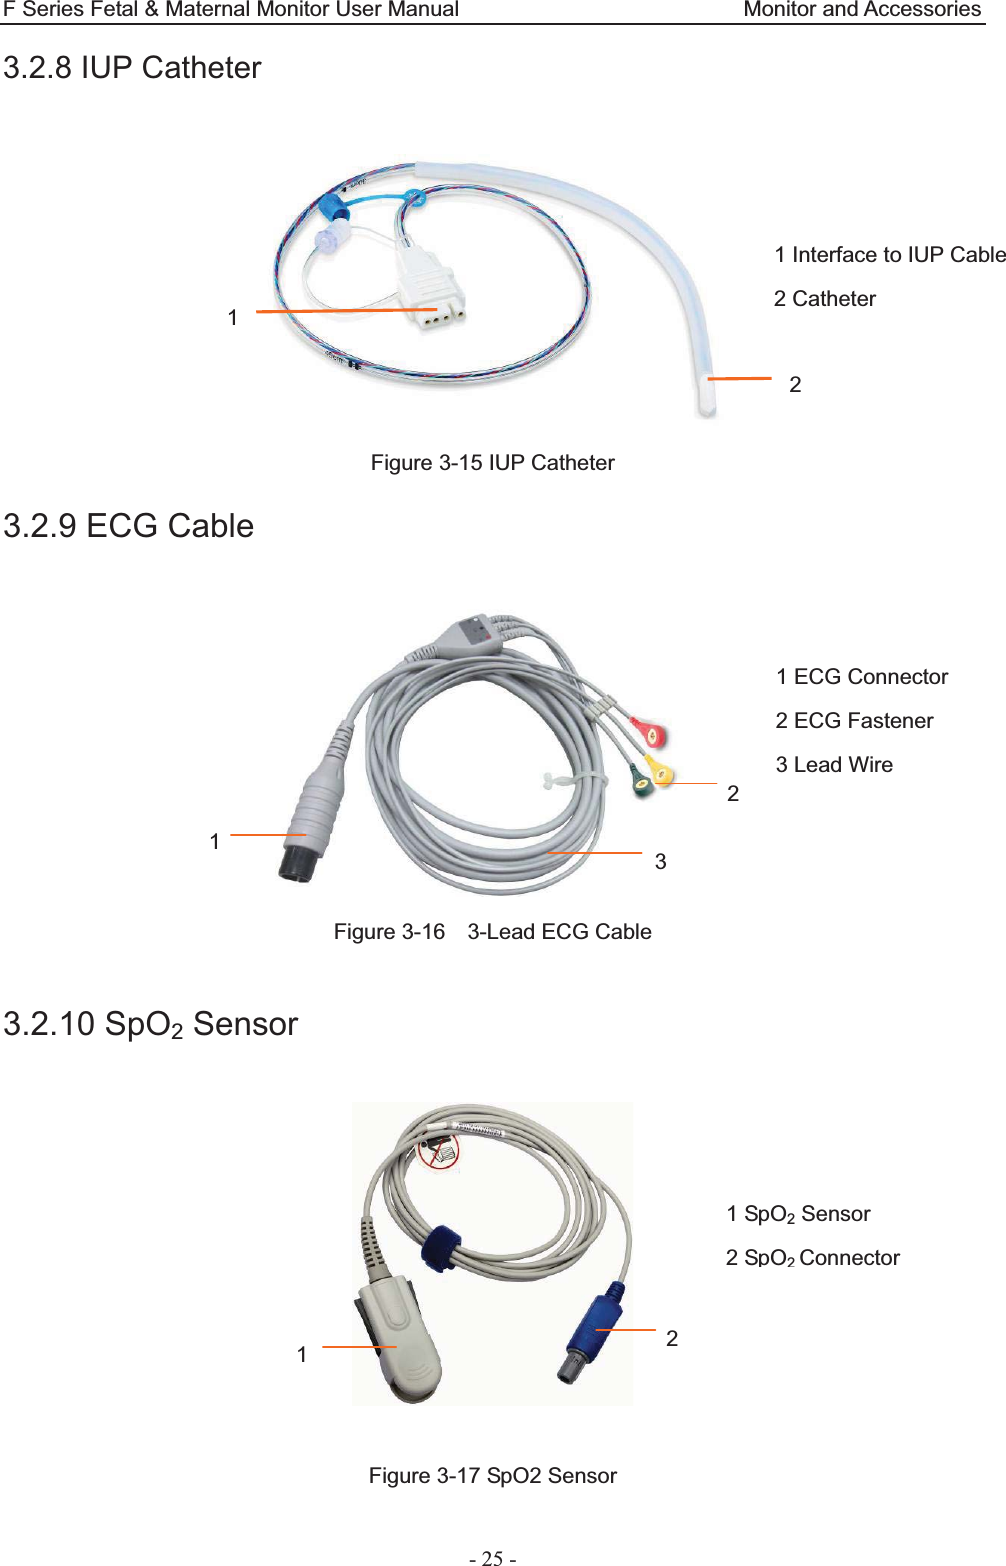 F Series Fetal &amp; Maternal Monitor User Manual                          Monitor and Accessories - 25 - 3.2.8 IUP Catheter   Figure 3-15 IUP Catheter 3.2.9 ECG Cable   Figure 3-16    3-Lead ECG Cable  3.2.10 SpO2 Sensor    Figure 3-17 SpO2 Sensor 12  1 Interface to IUP Cable 2 Catheter 1 ECG Connector   2 ECG Fastener 3 Lead Wire 1 SpO2 Sensor 2 SpO2Connector1  2 1 2 3  